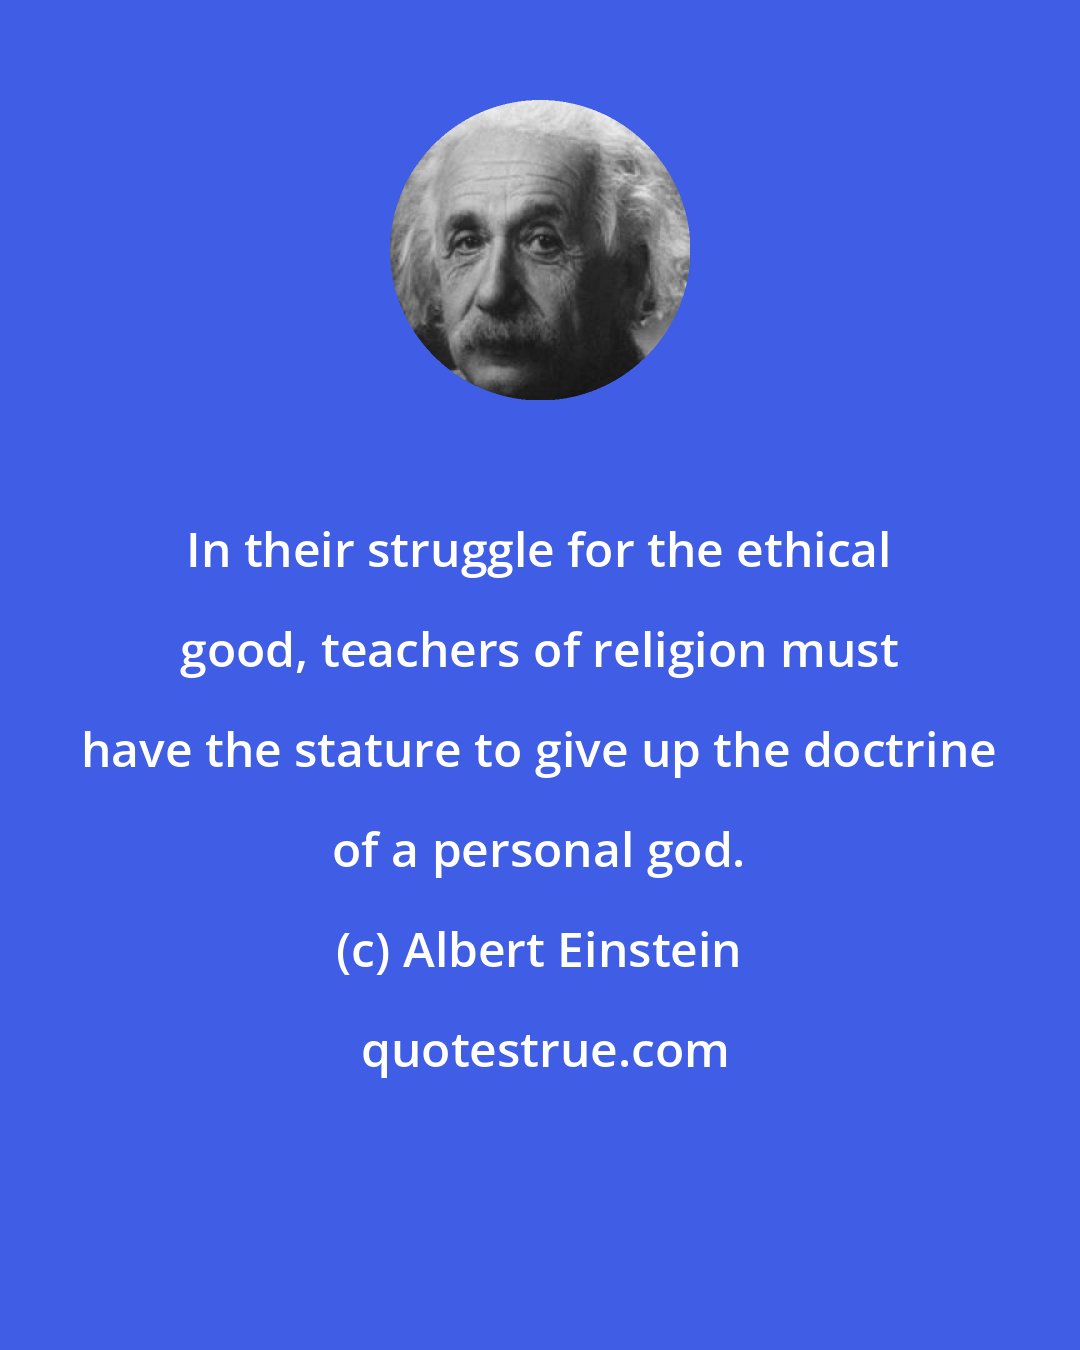 Albert Einstein: In their struggle for the ethical good, teachers of religion must have the stature to give up the doctrine of a personal god.